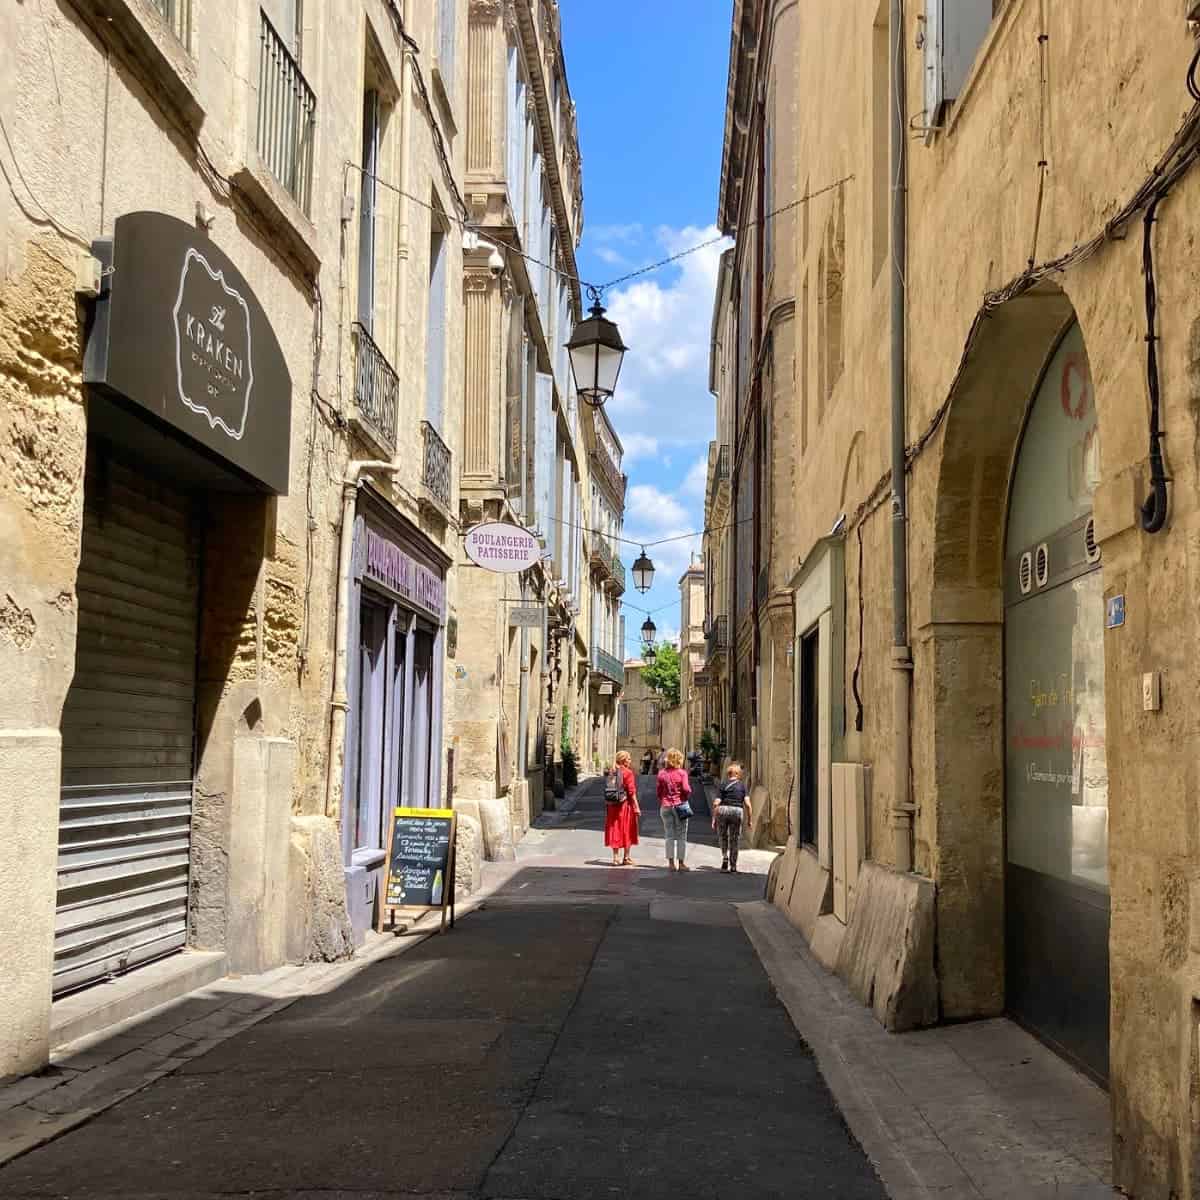 A narrow passageway between stone buildings in the Old Town Montpellier.